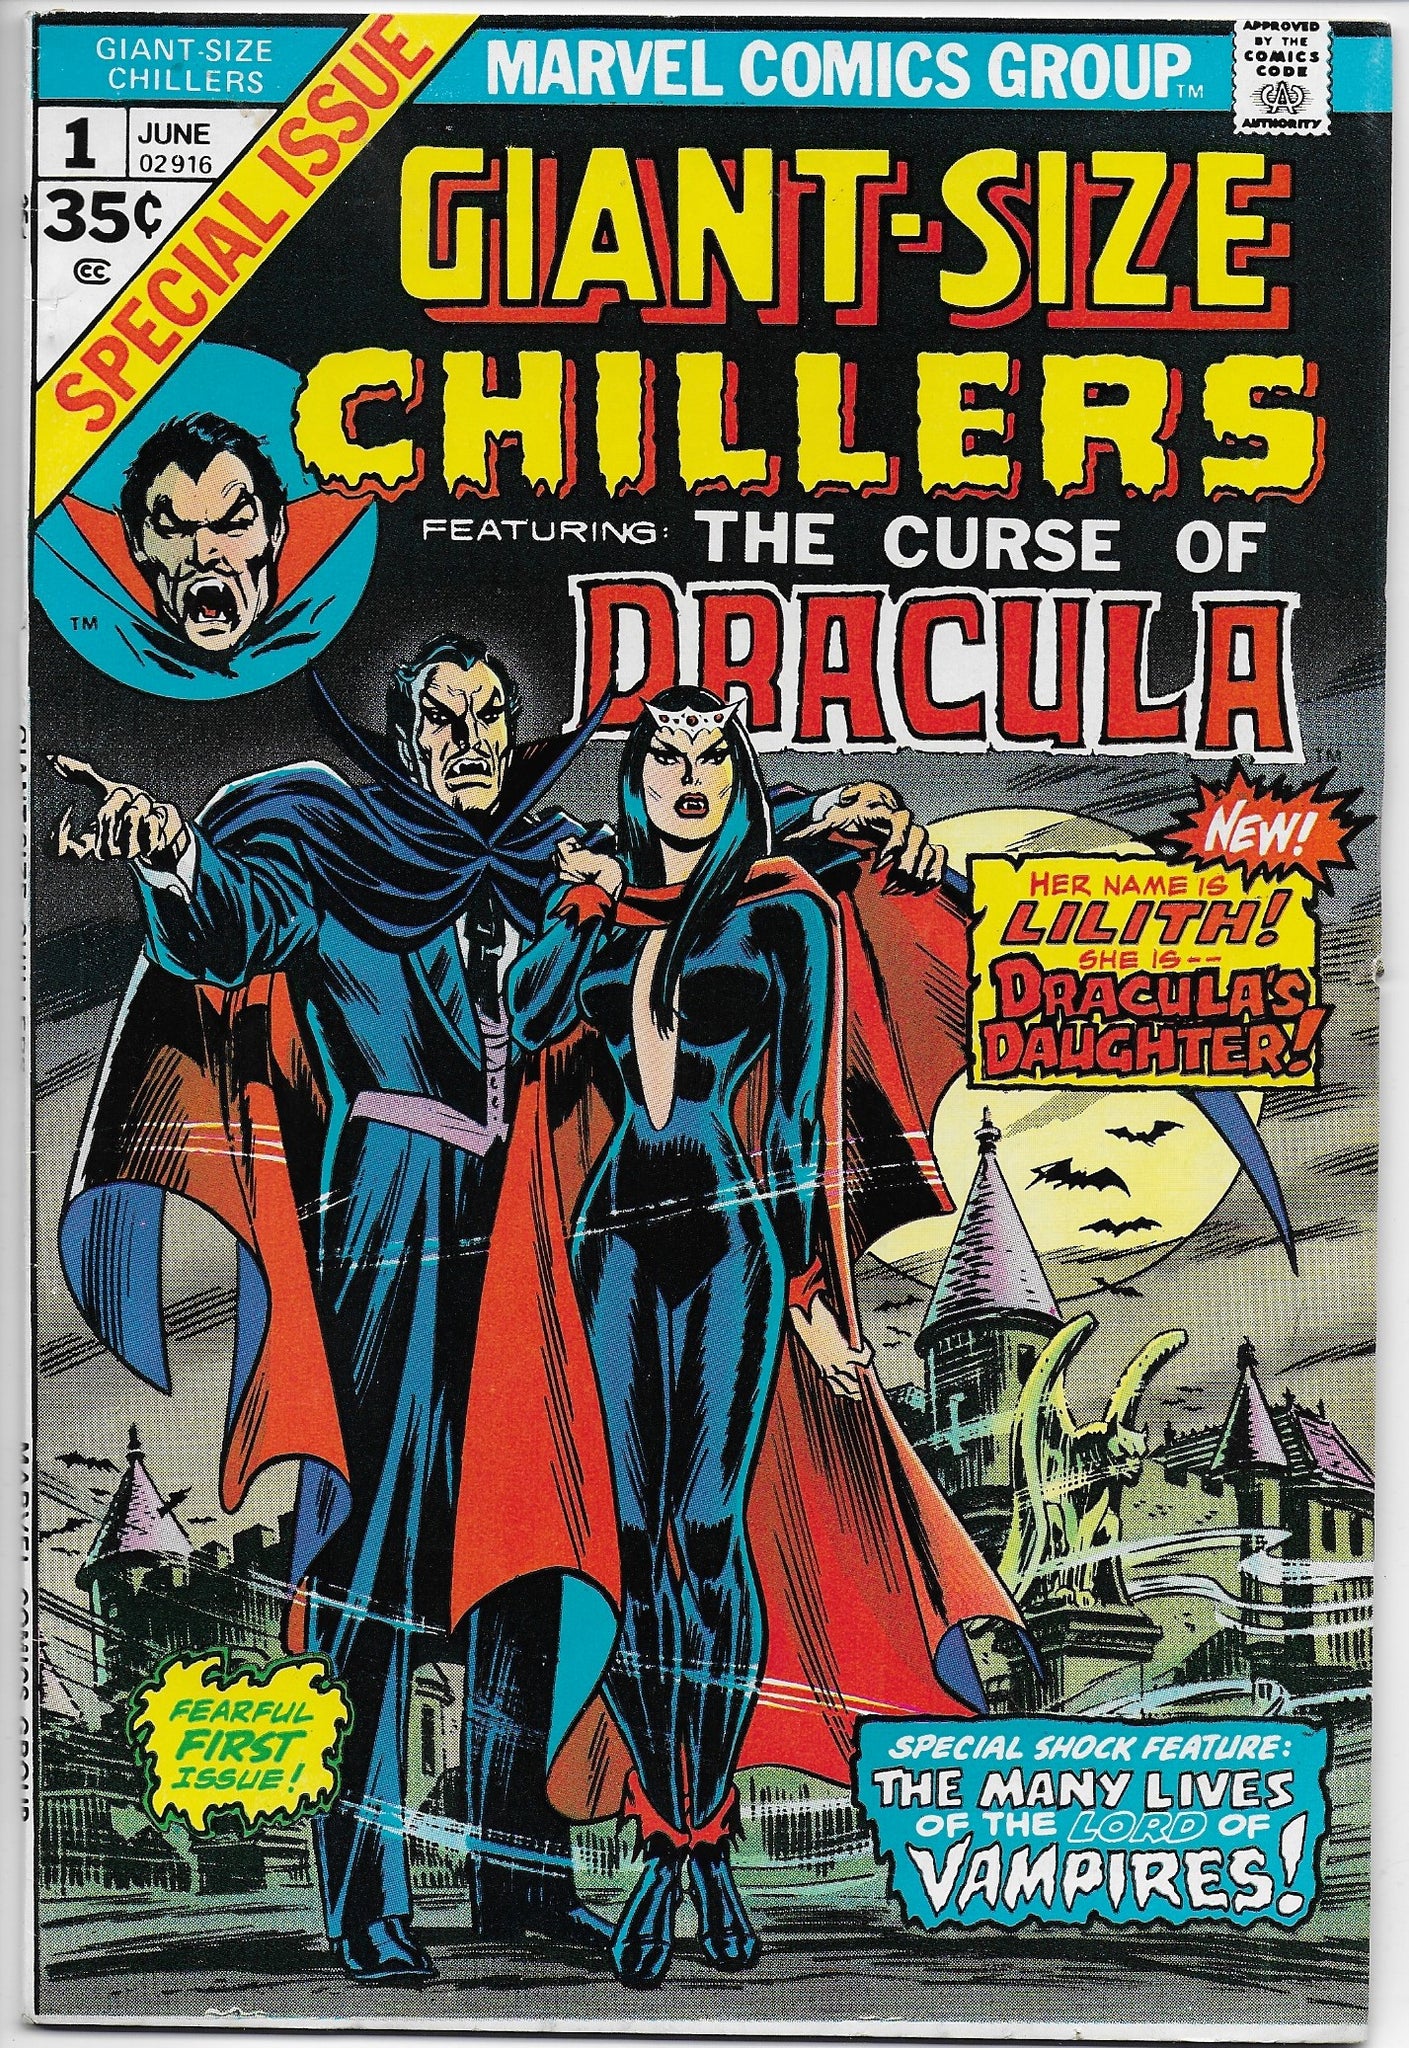 giant-size chillers: the curse of dracula